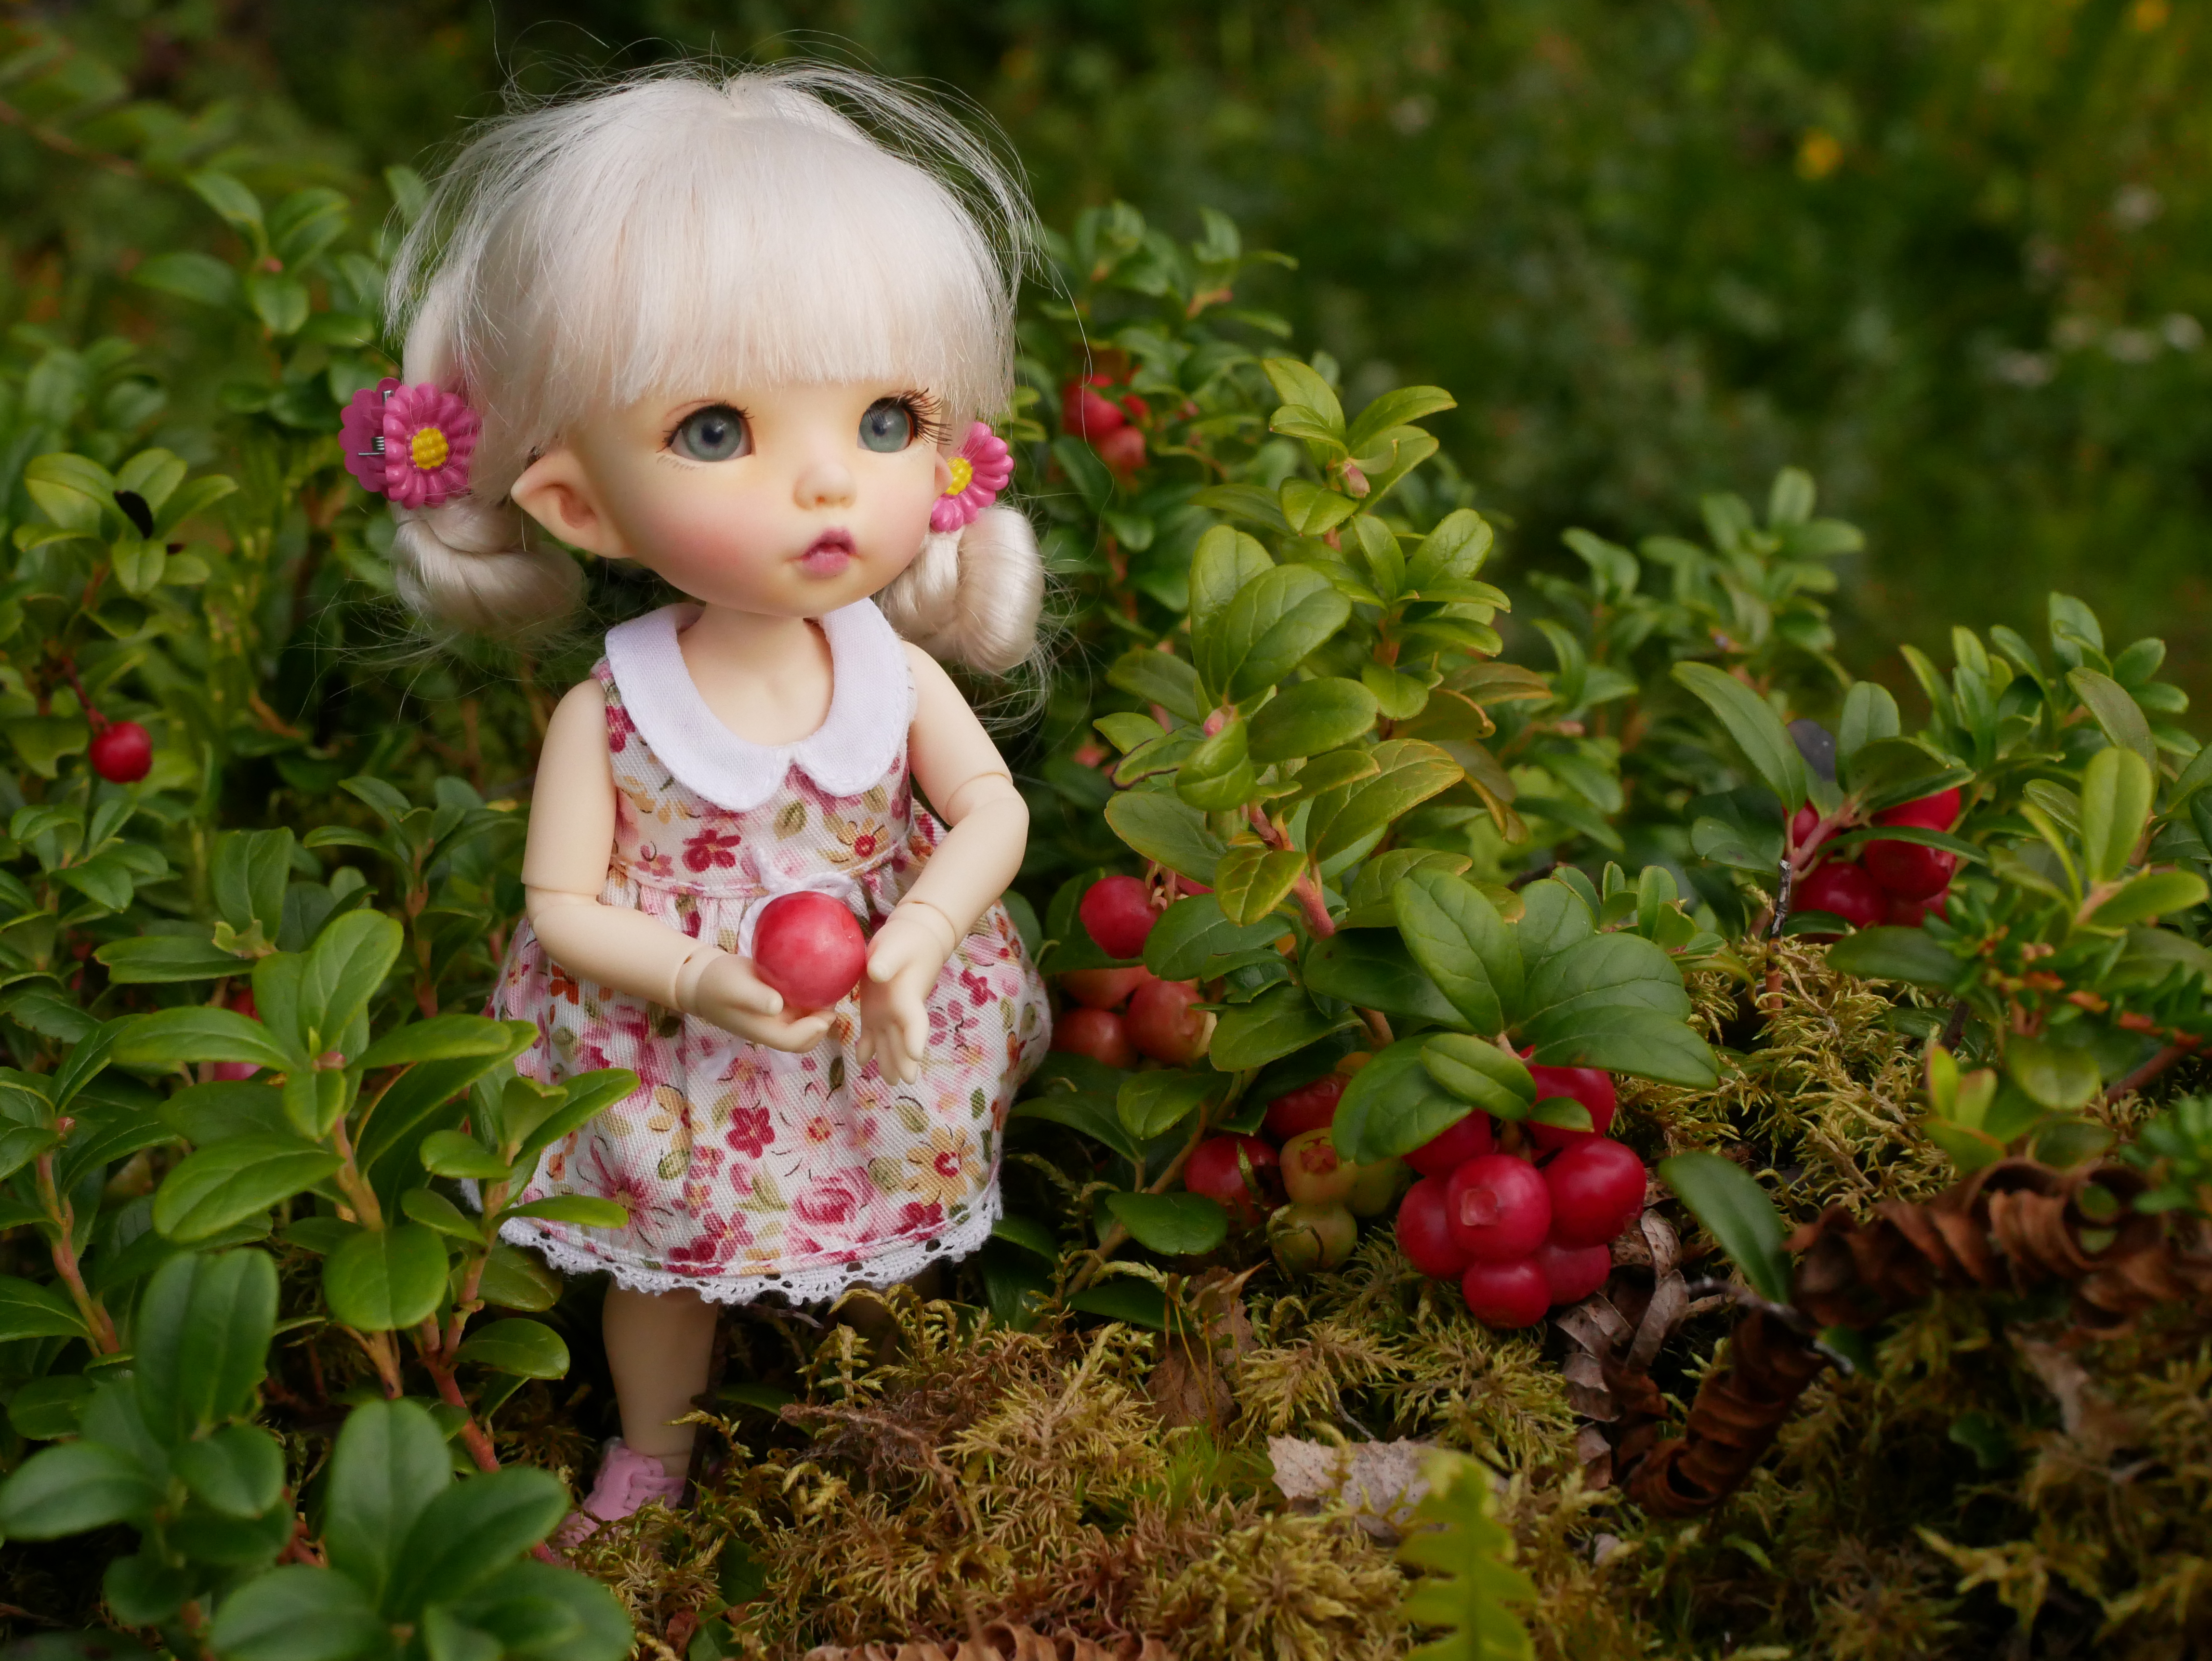 Signe with berries